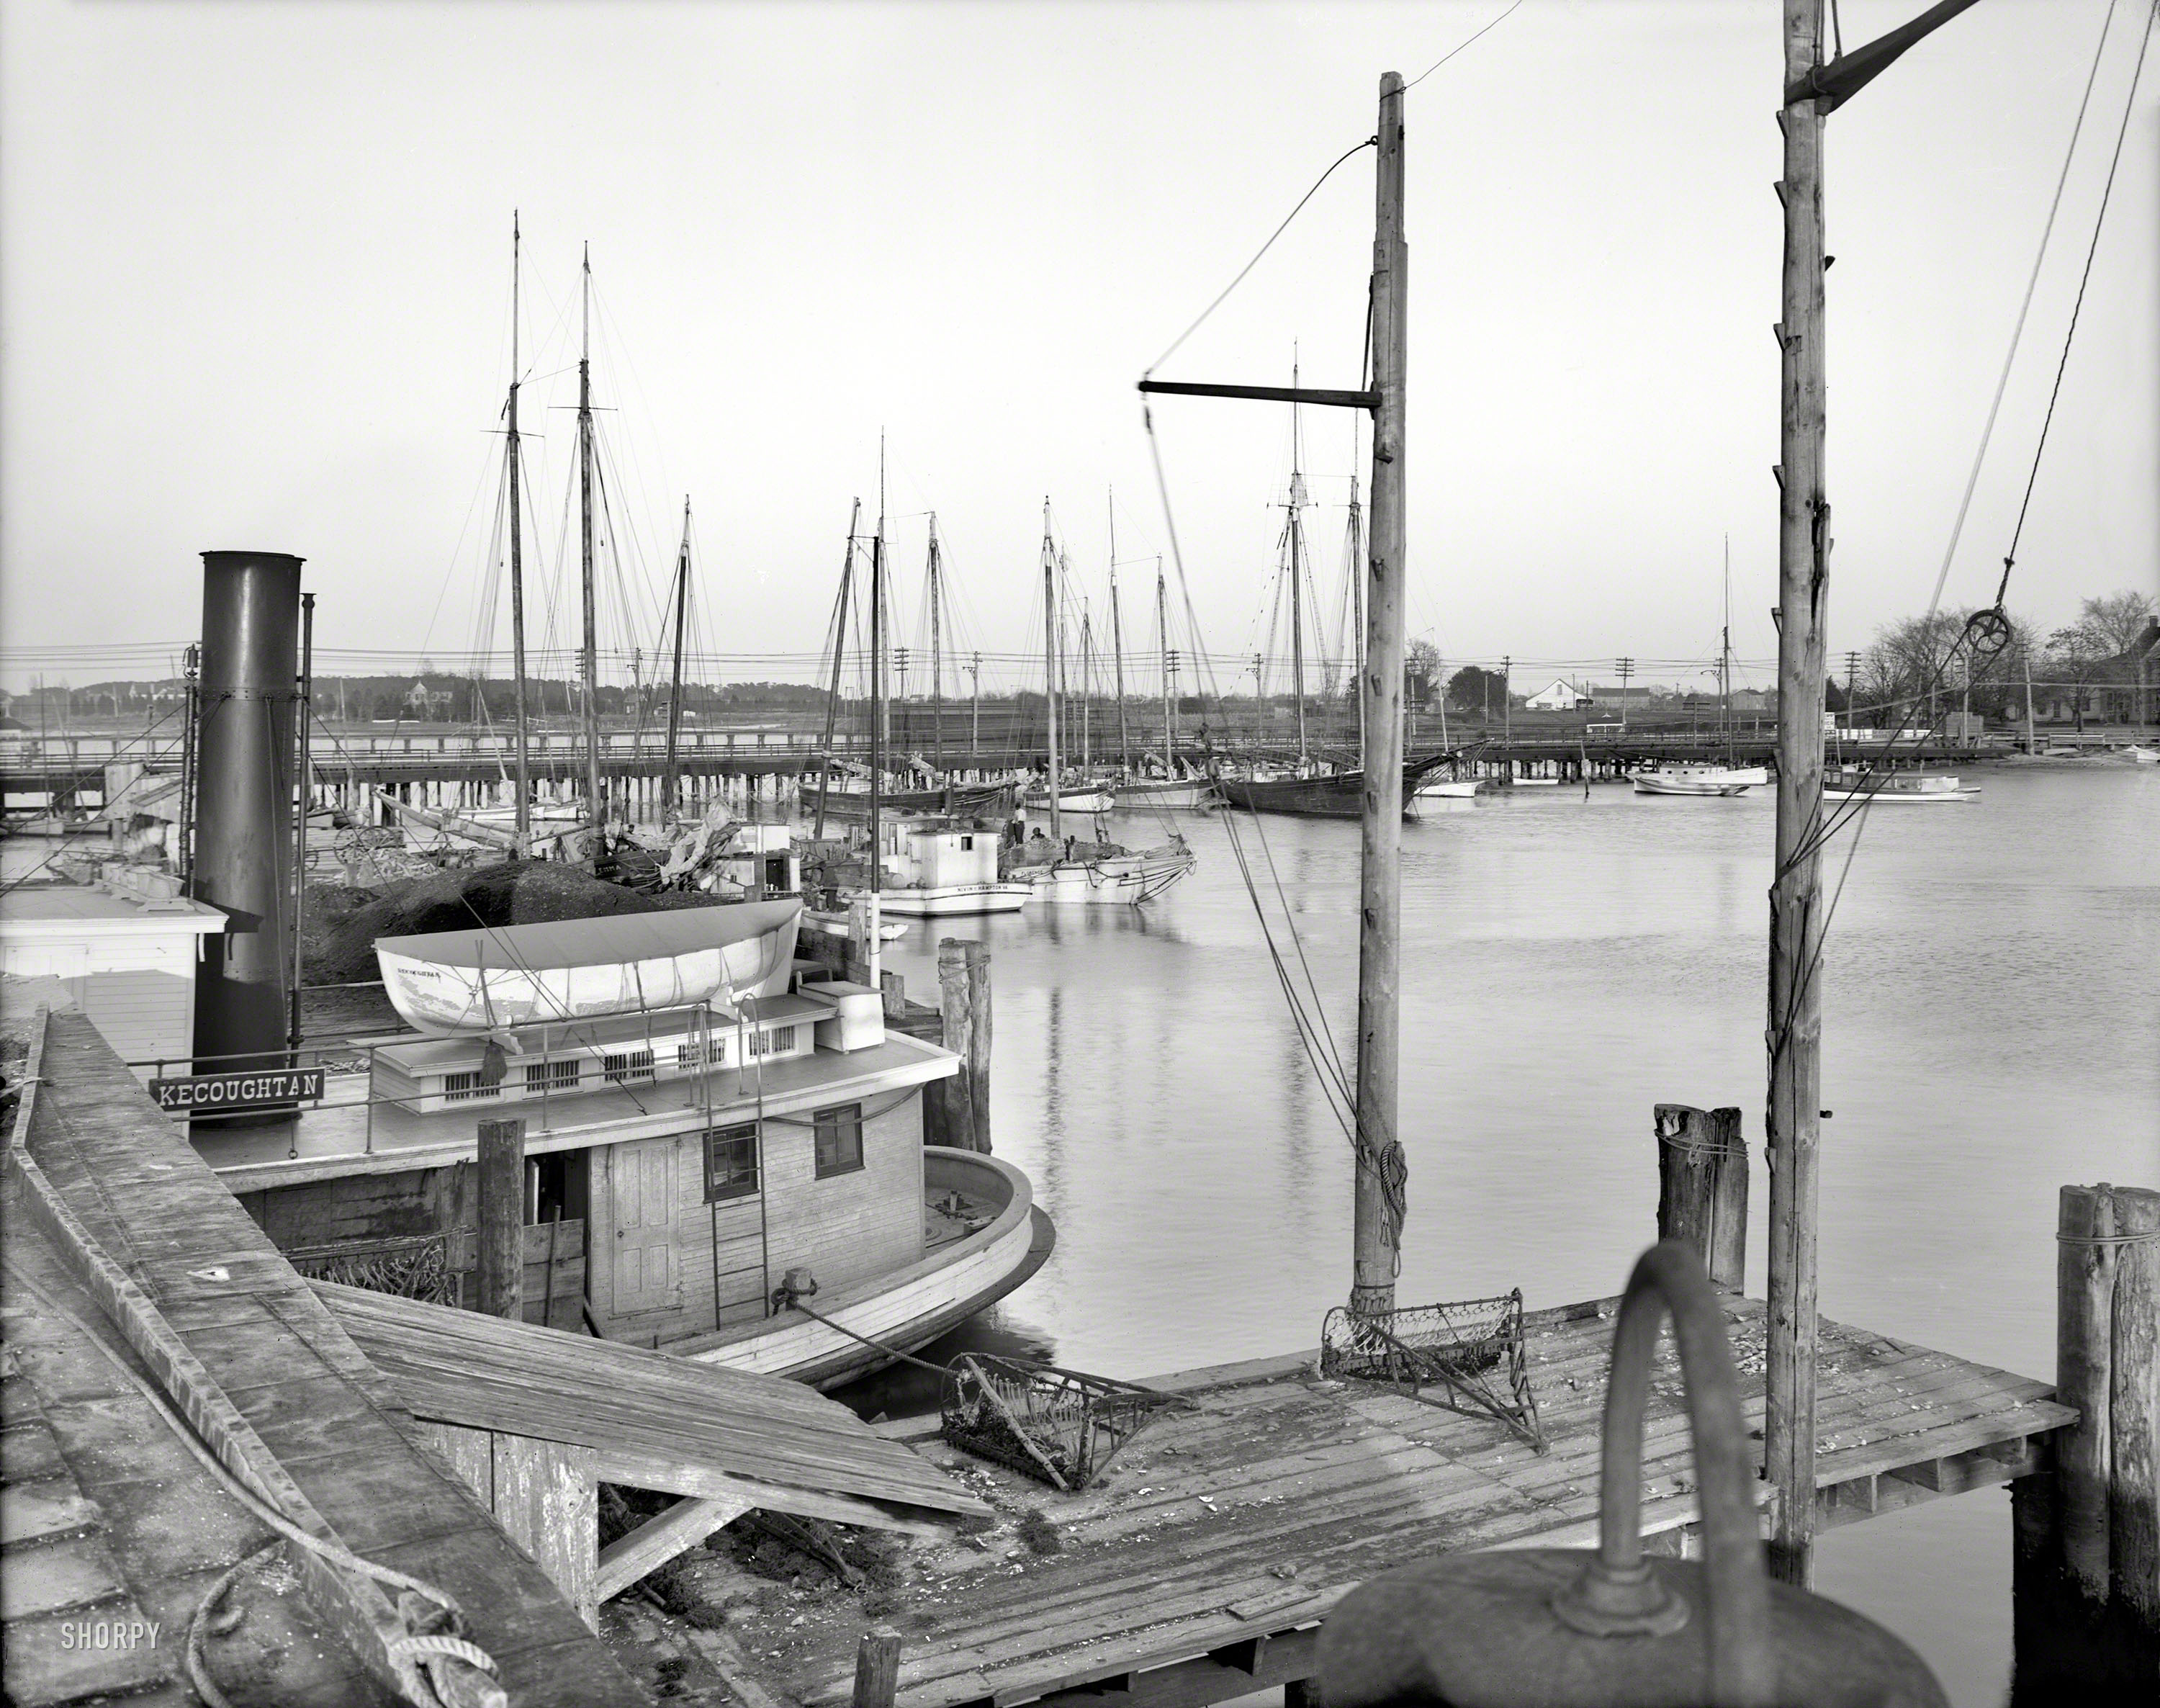 Hampton, Virginia, circa 1908. "Oyster steamboat Kecoughtan at landing." 8x10 inch dry plate glass negative, Detroit Publishing Company. View full size.